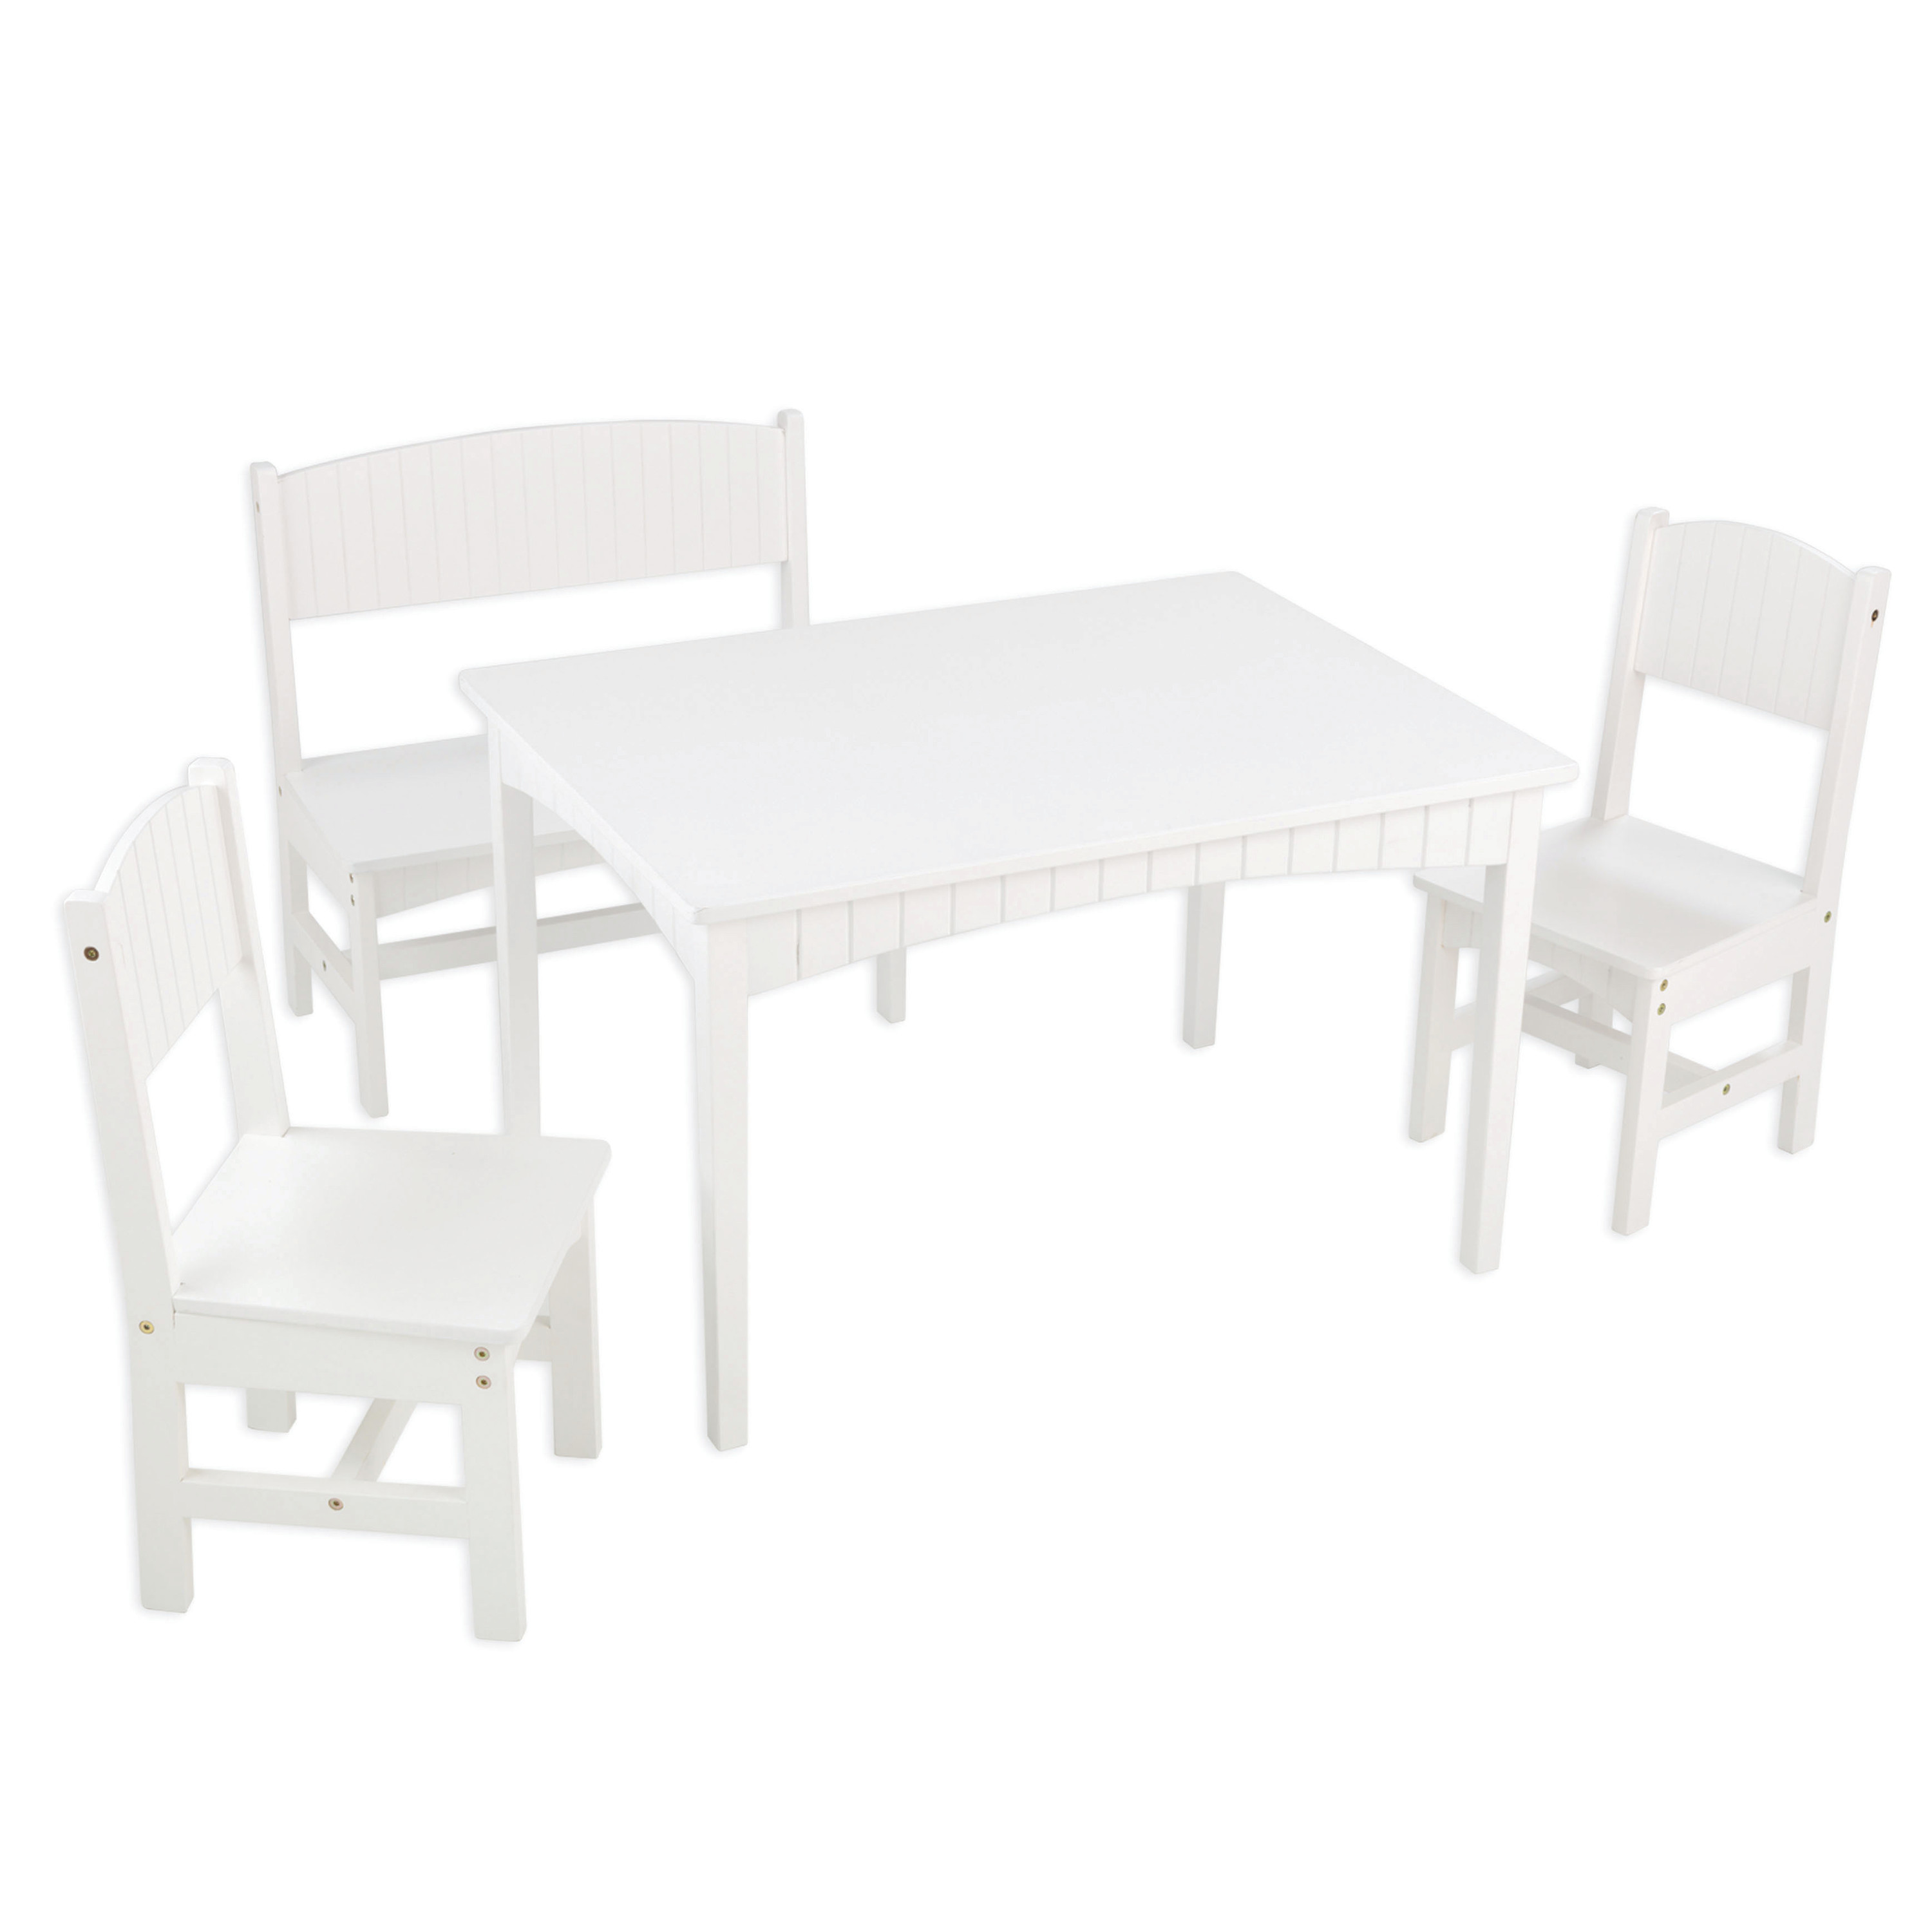 KidKraft Nantucket Wooden Table with Bench and 2 Chairs, Children's Furniture - White - image 4 of 8